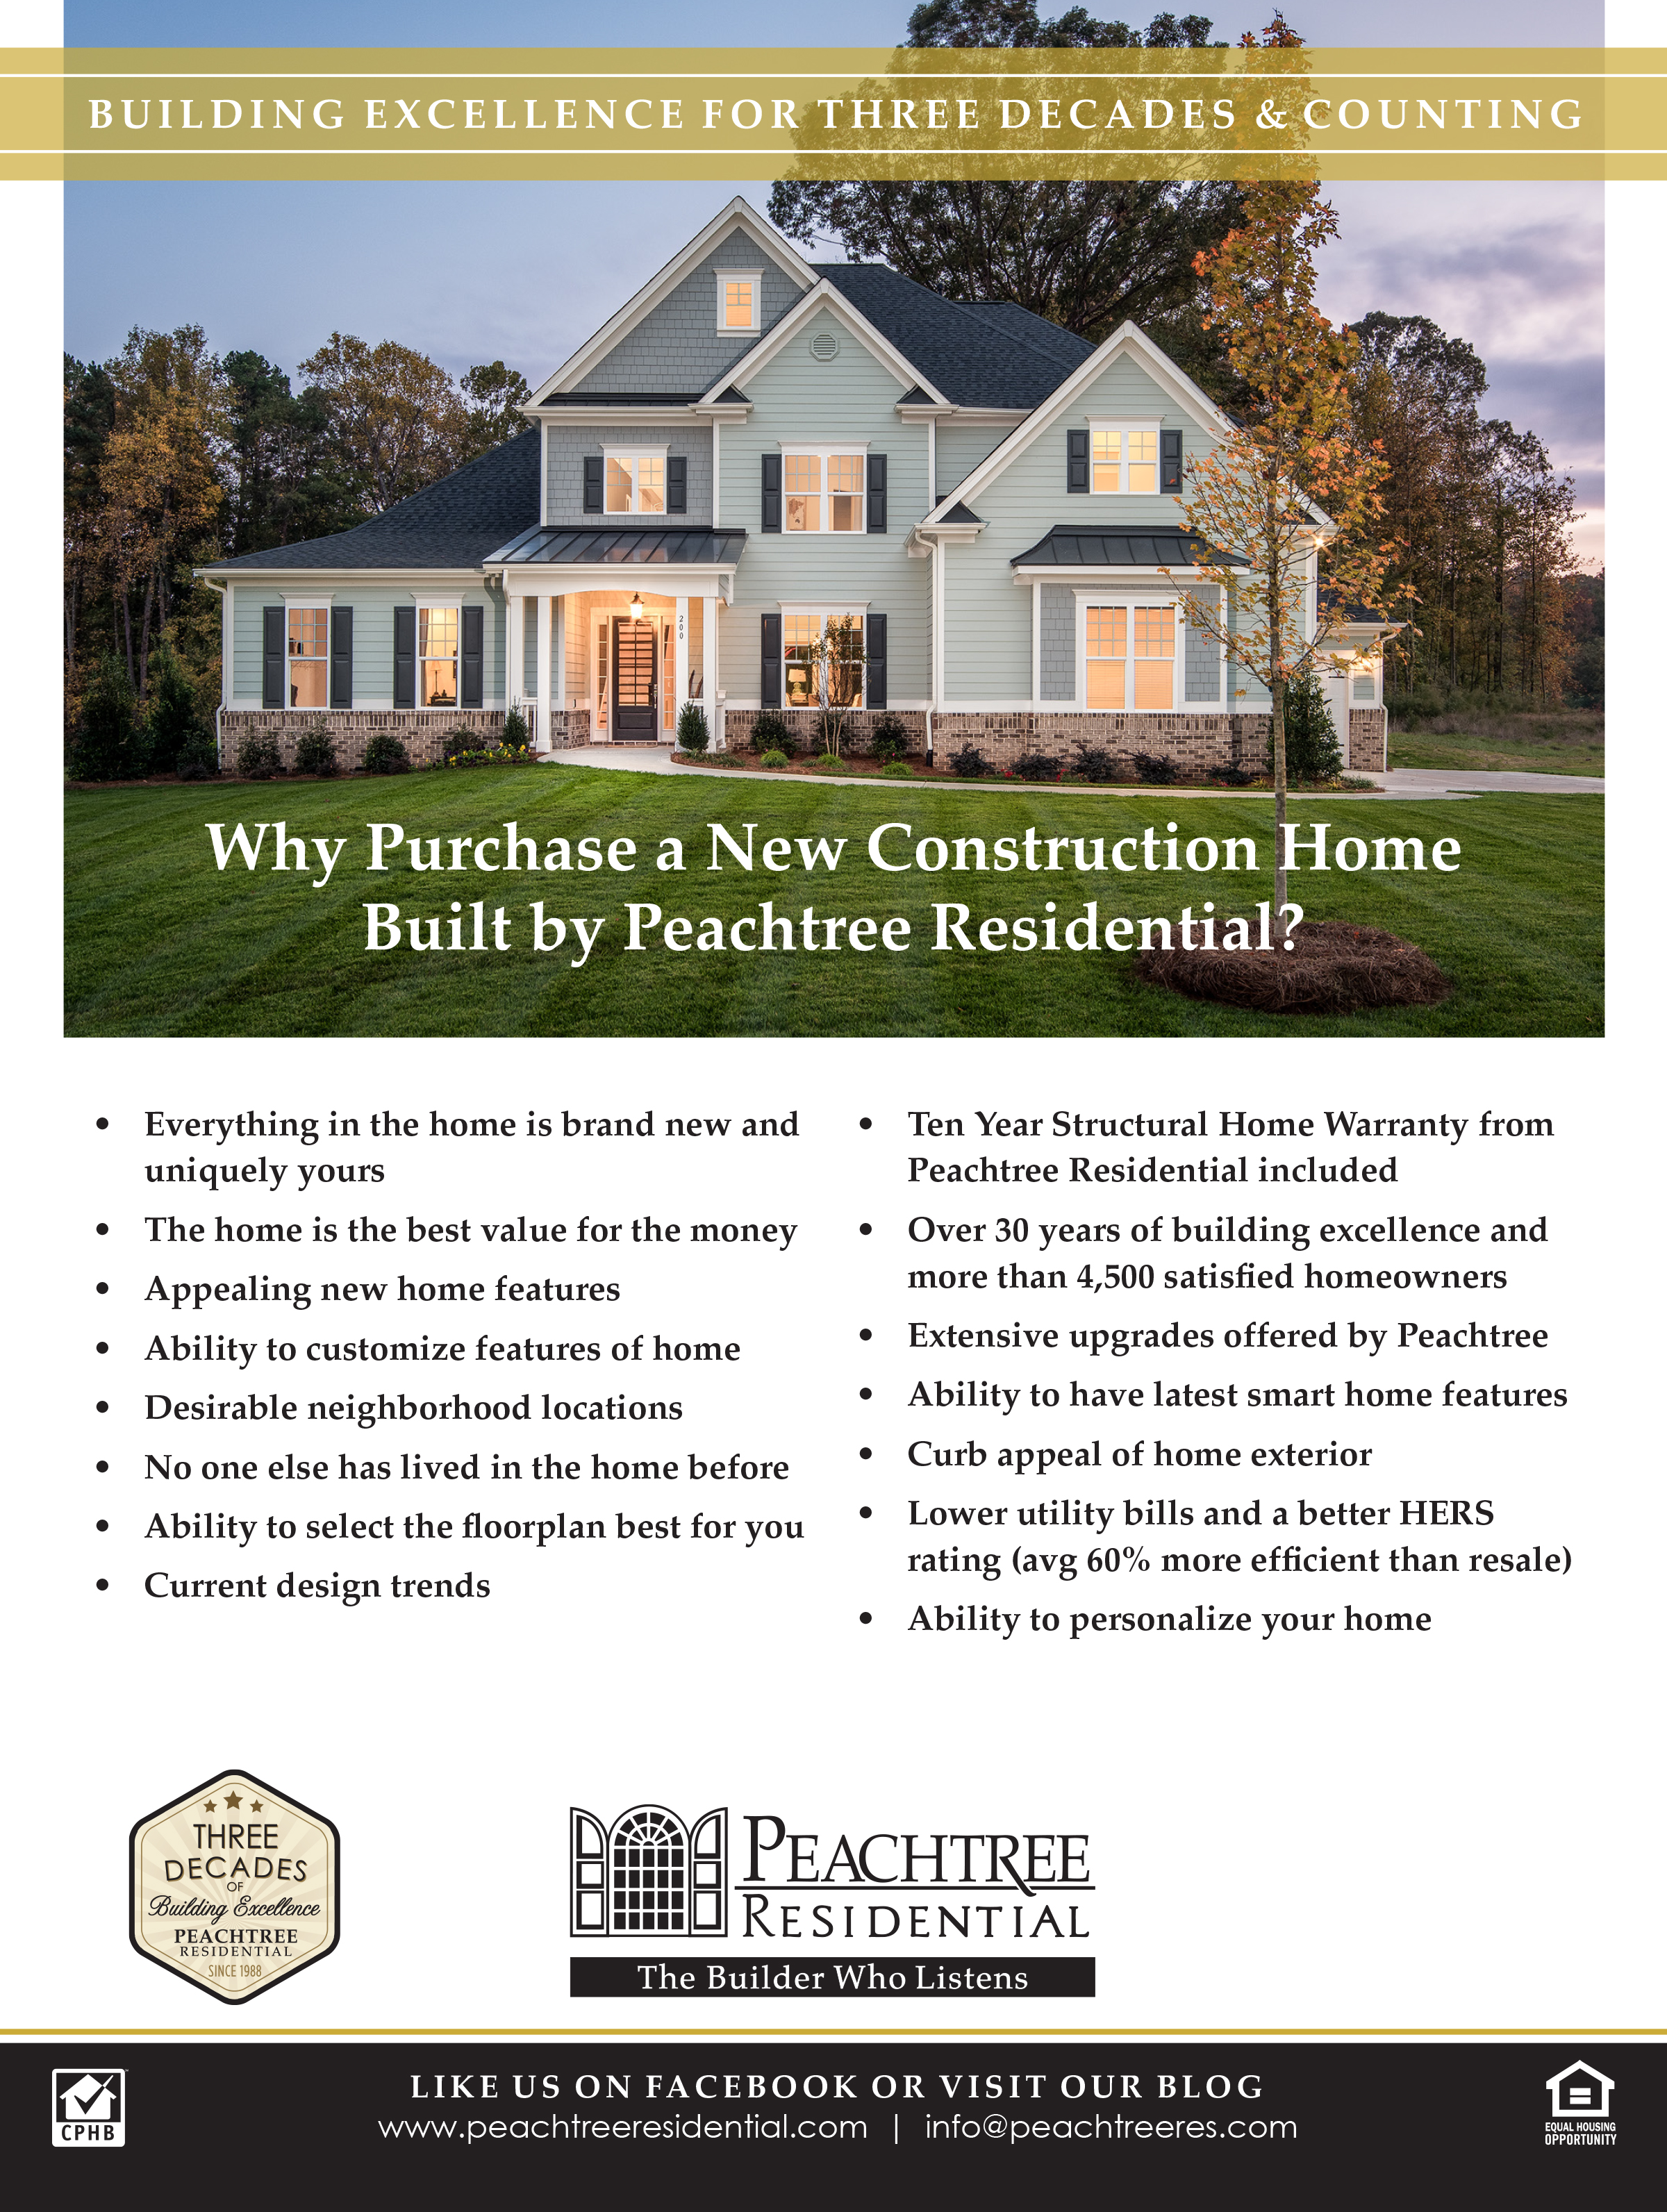 https://www.peachtreeresidential.com/wp-content/uploads/2018/11/Why-Buy-New-Peachtree-2018.jpg